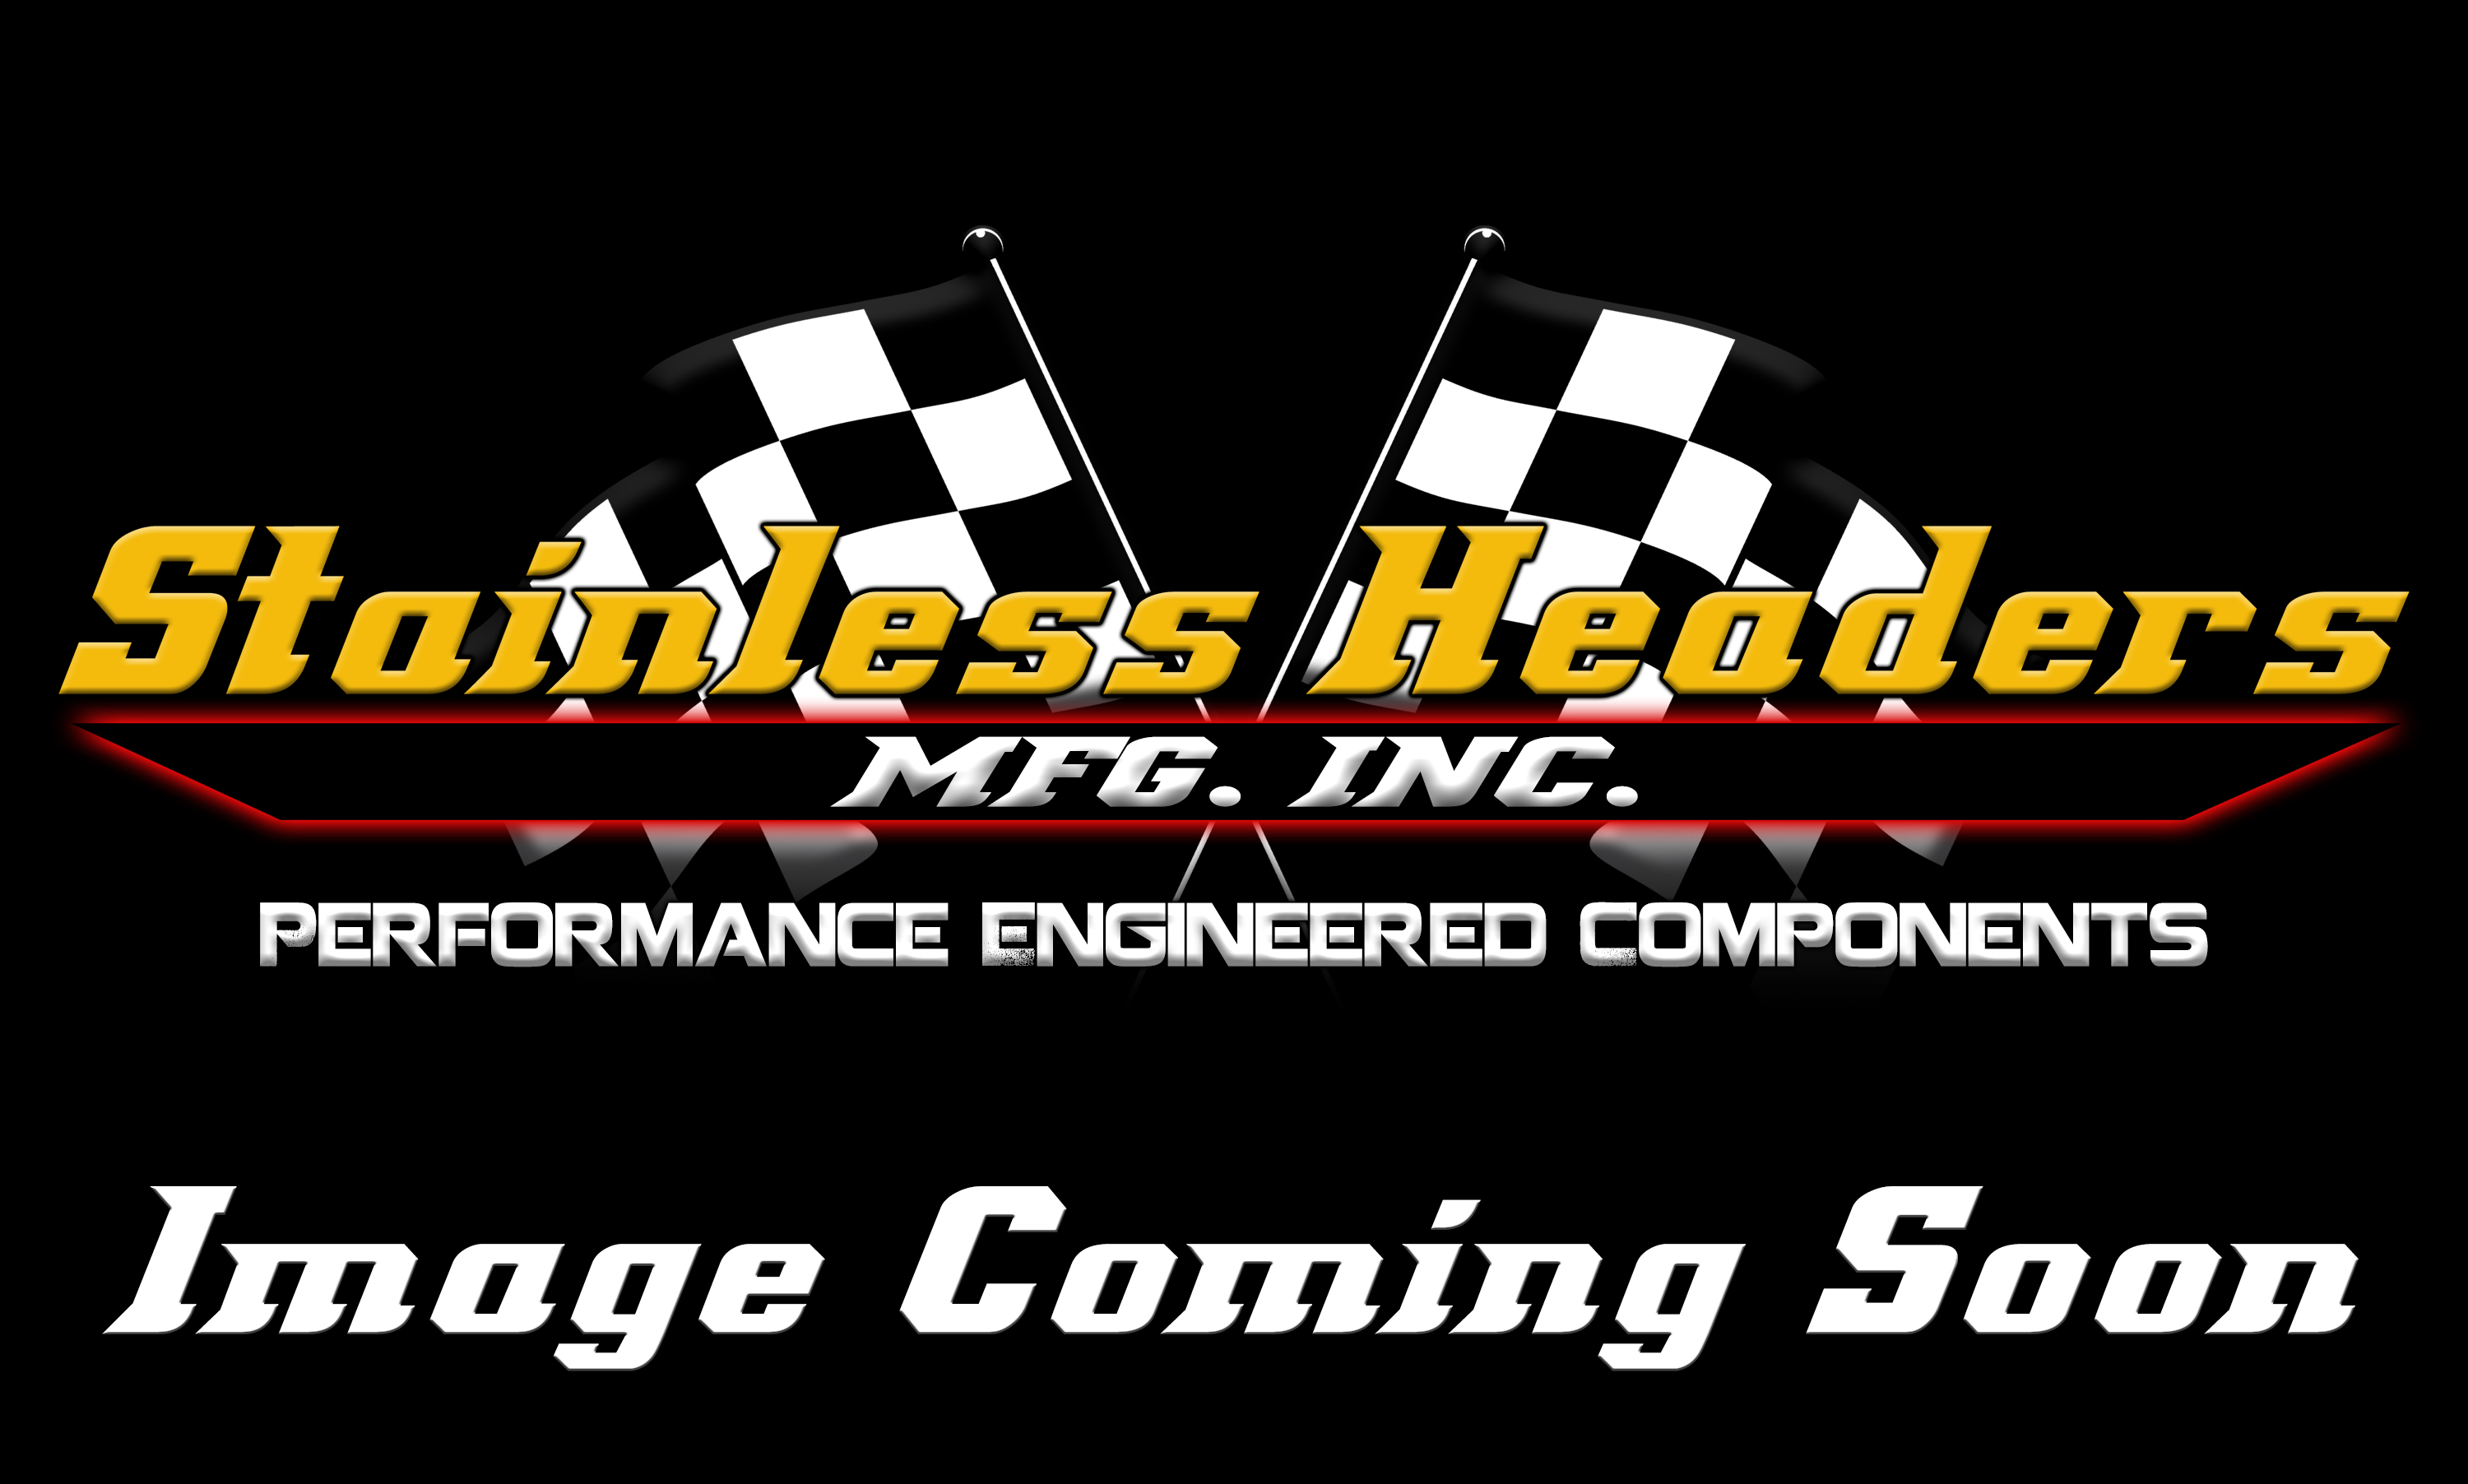 CompTurbo Technology Turbochargers - Comp Turbo Journal Bearing Turbochargers - CompTurbo Technologies - CTR3281E-6062 360 Journal Bearing Turbocharger (750 HP)